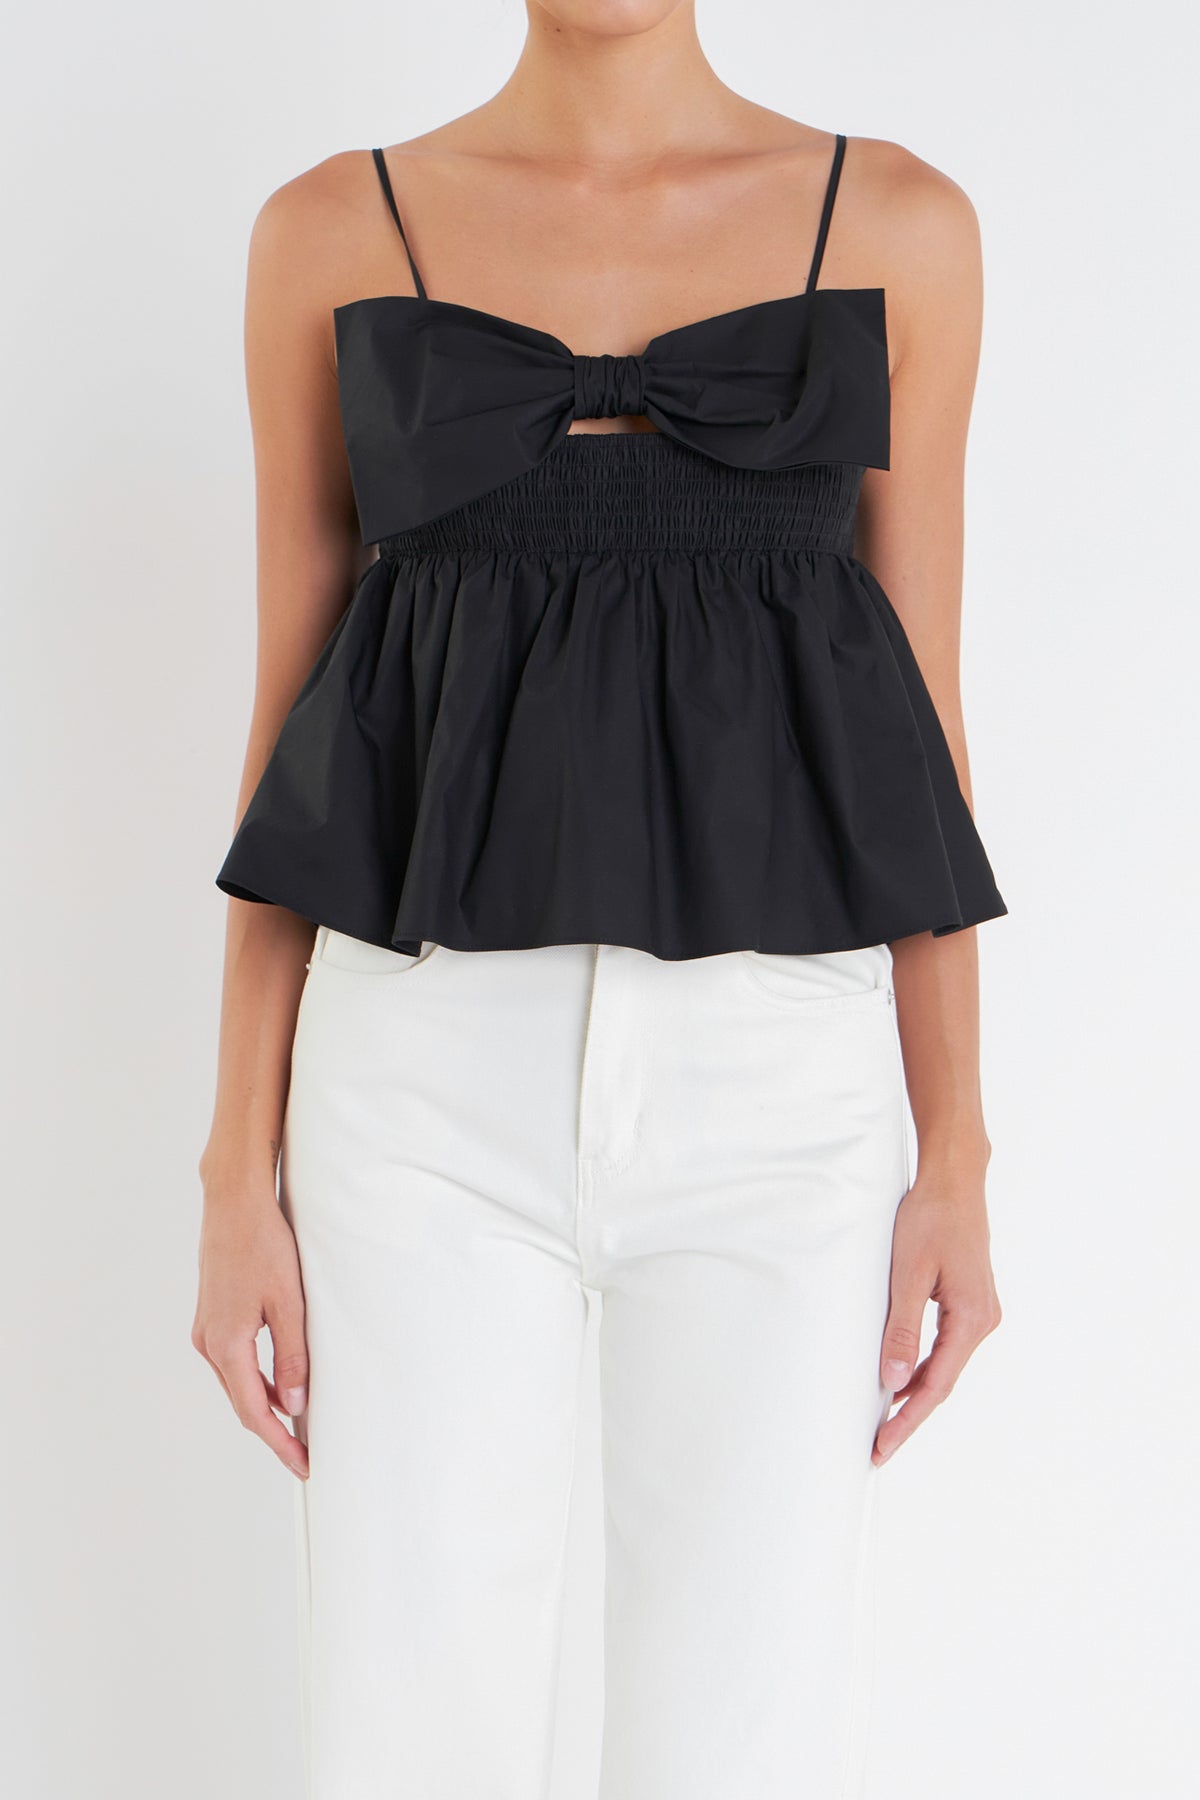 ENGLISH FACTORY - Bow Peplum Top - TOPS available at Objectrare